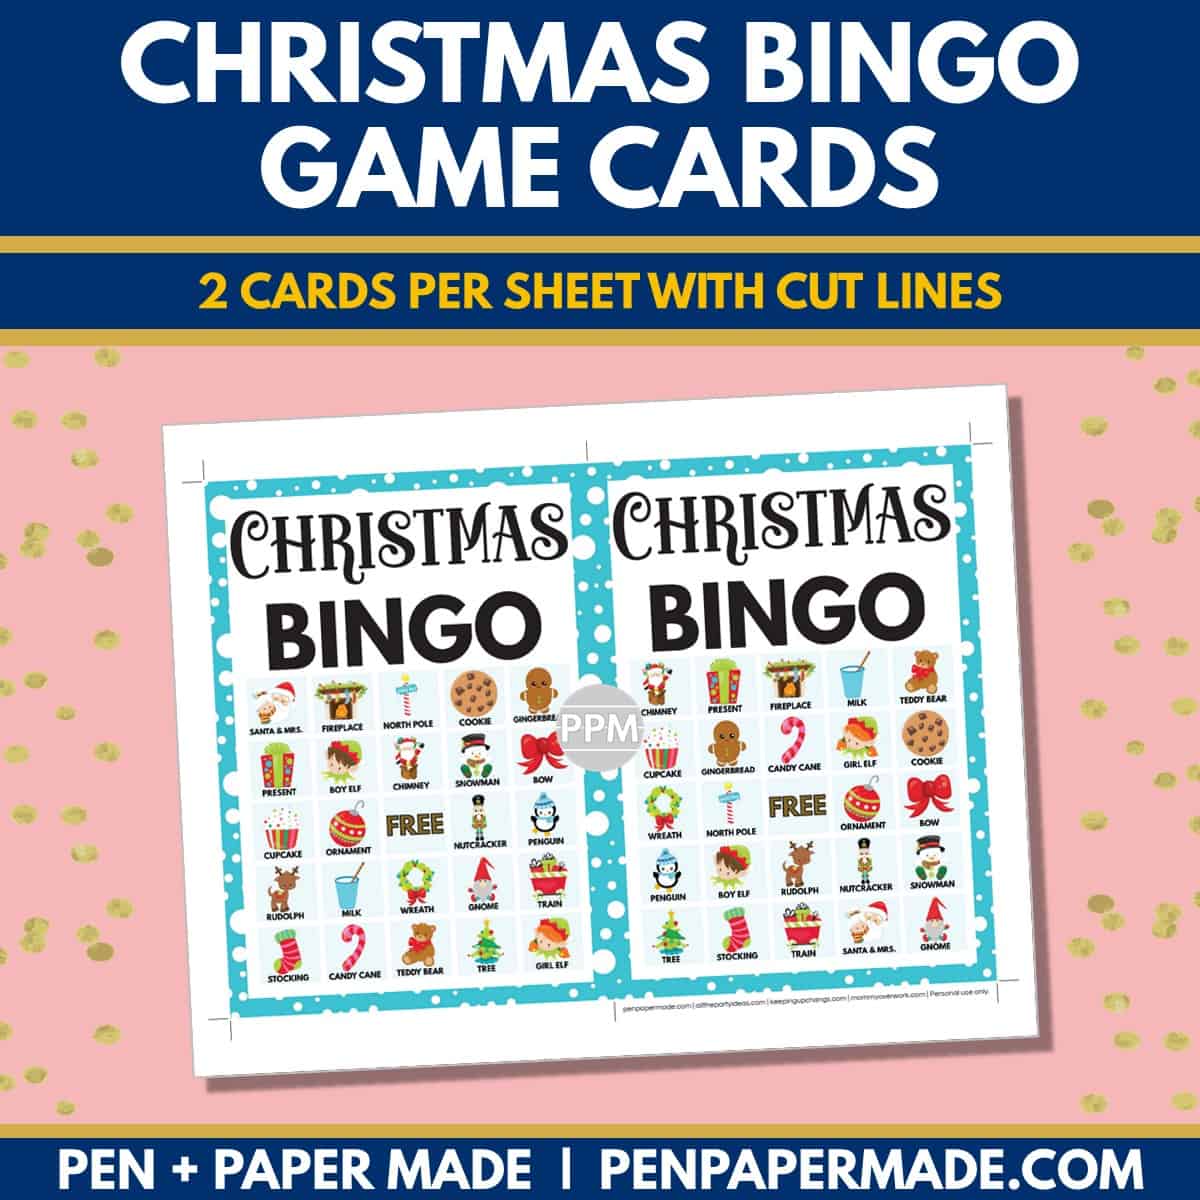 christmas bingo card 5x5 5x7 game boards with images and text words.